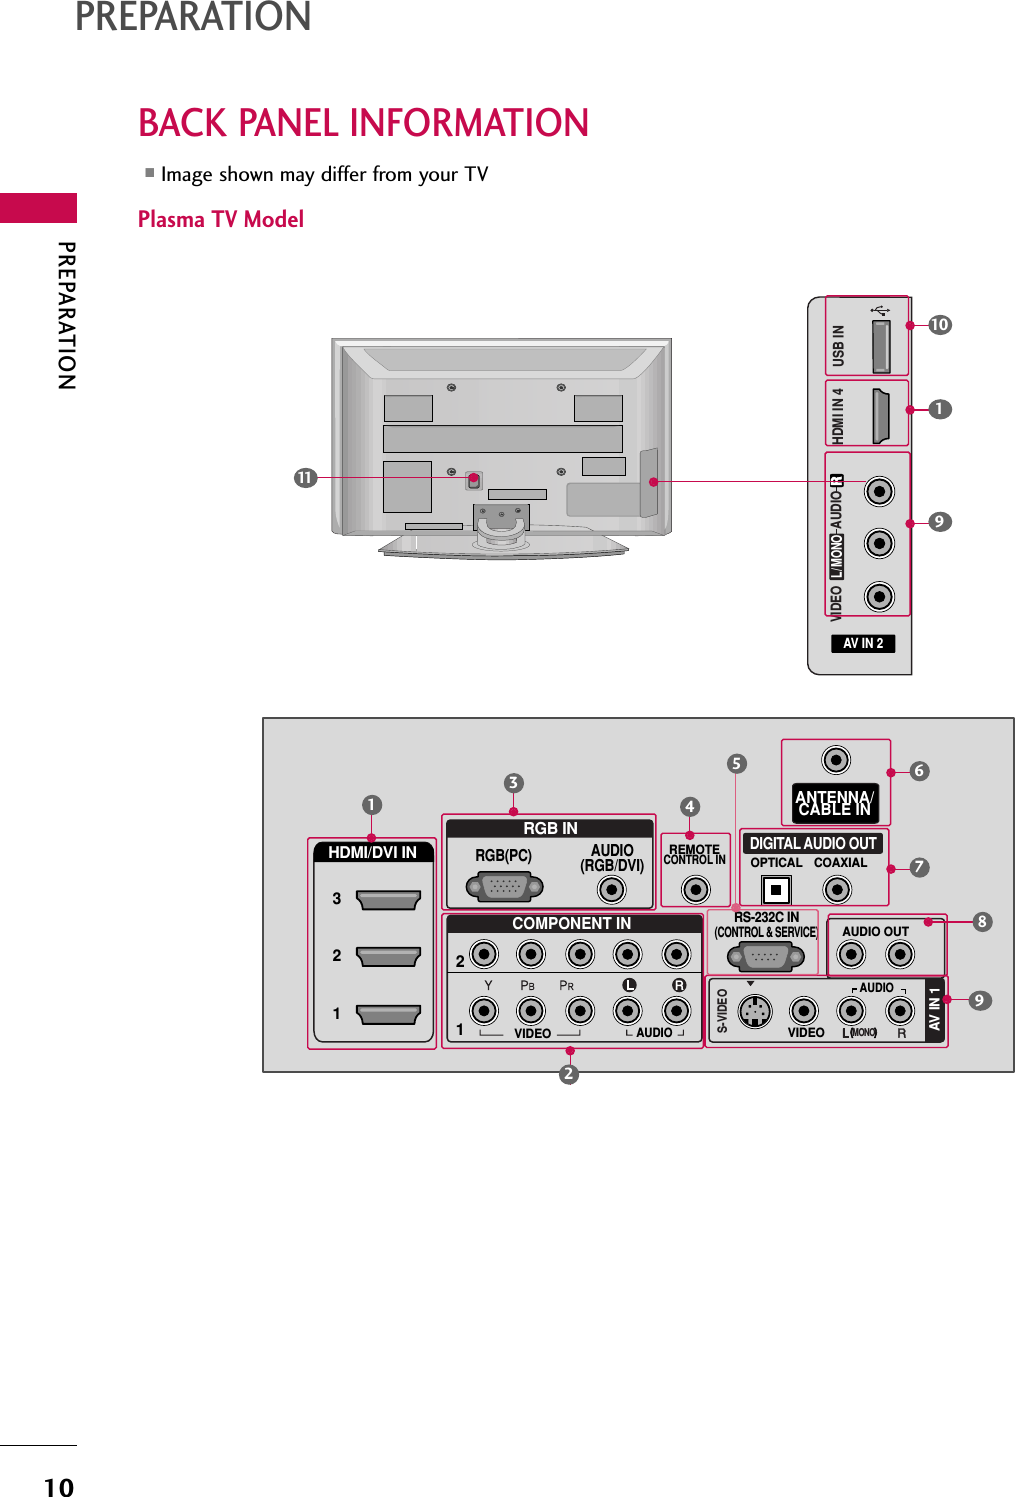 PREPARATION10BACK PANEL INFORMATIONPREPARATIONPlasma TV Model■Image shown may differ from your TVAV IN 2L/MONORAUDIOVIDEOUSB INHDMI IN 4(            )RRGB INCOMPONENT INAUDIO(RGB/DVI)RGB(PC)ANTENNA/CABLE IN12RS-232C IN(CONTROL &amp; SERVICE)VIDEOAUDIOVIDEOAUDIO OUTOPTICAL COAXIALMONO(            )AUDIOS-VIDEODIGITAL AUDIO OUTAV IN 1HDMI/DVI IN 321REMOTECONTROL IN134678211995101